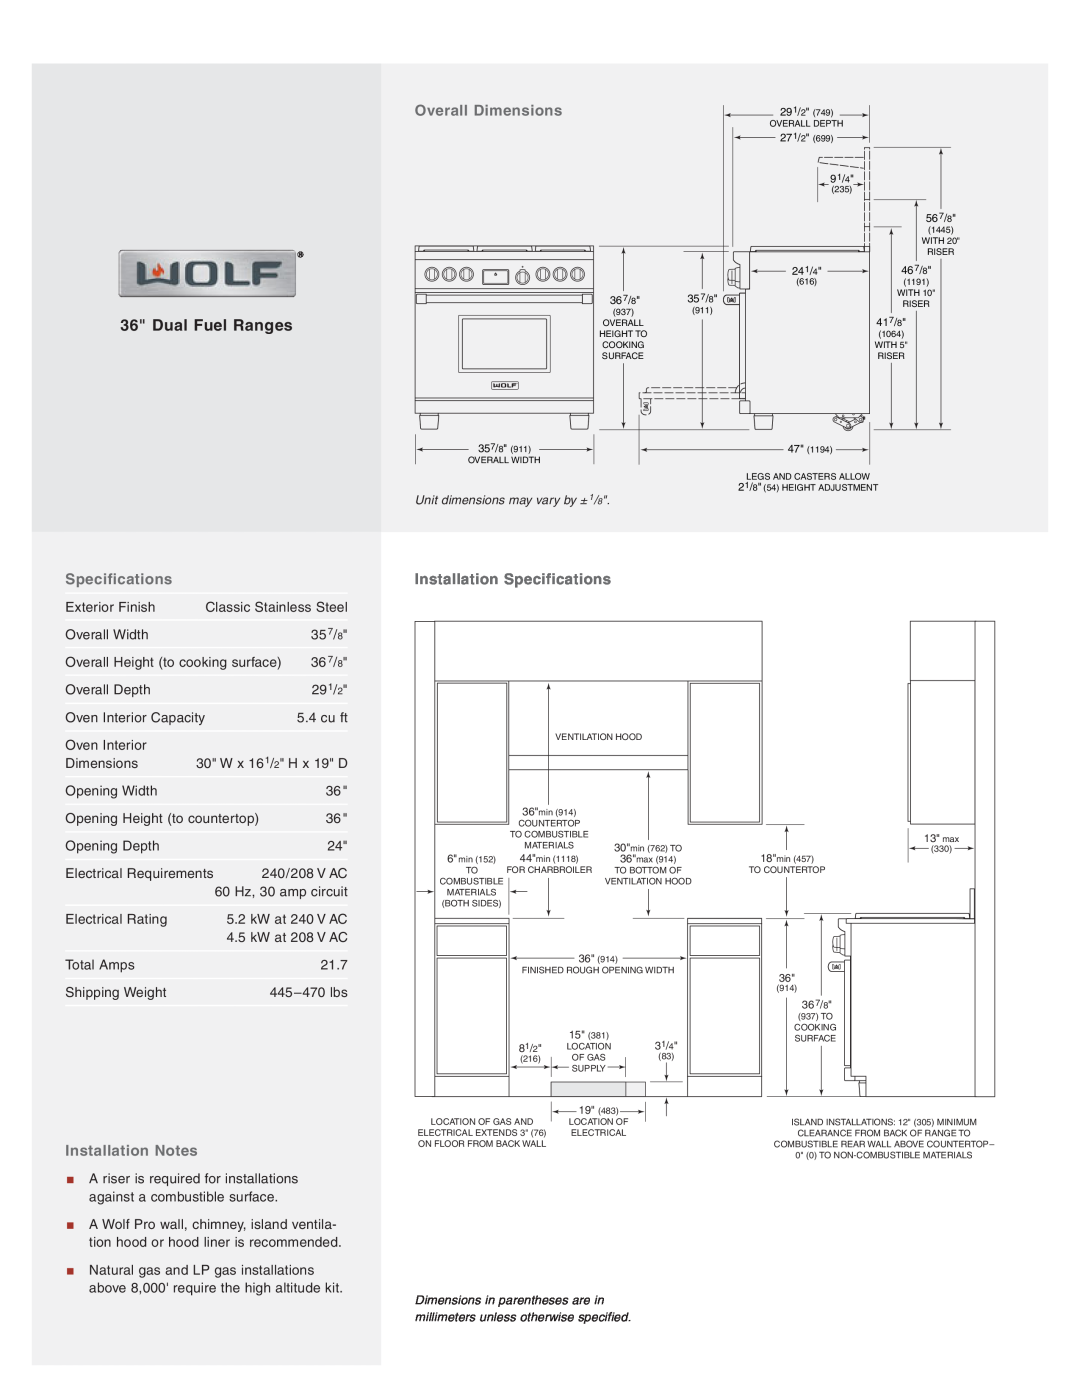 Wolf Appliance Company W362210R Overall Dimensions, Installation Notes, Installation Specifications, Dual Fuel Ranges 